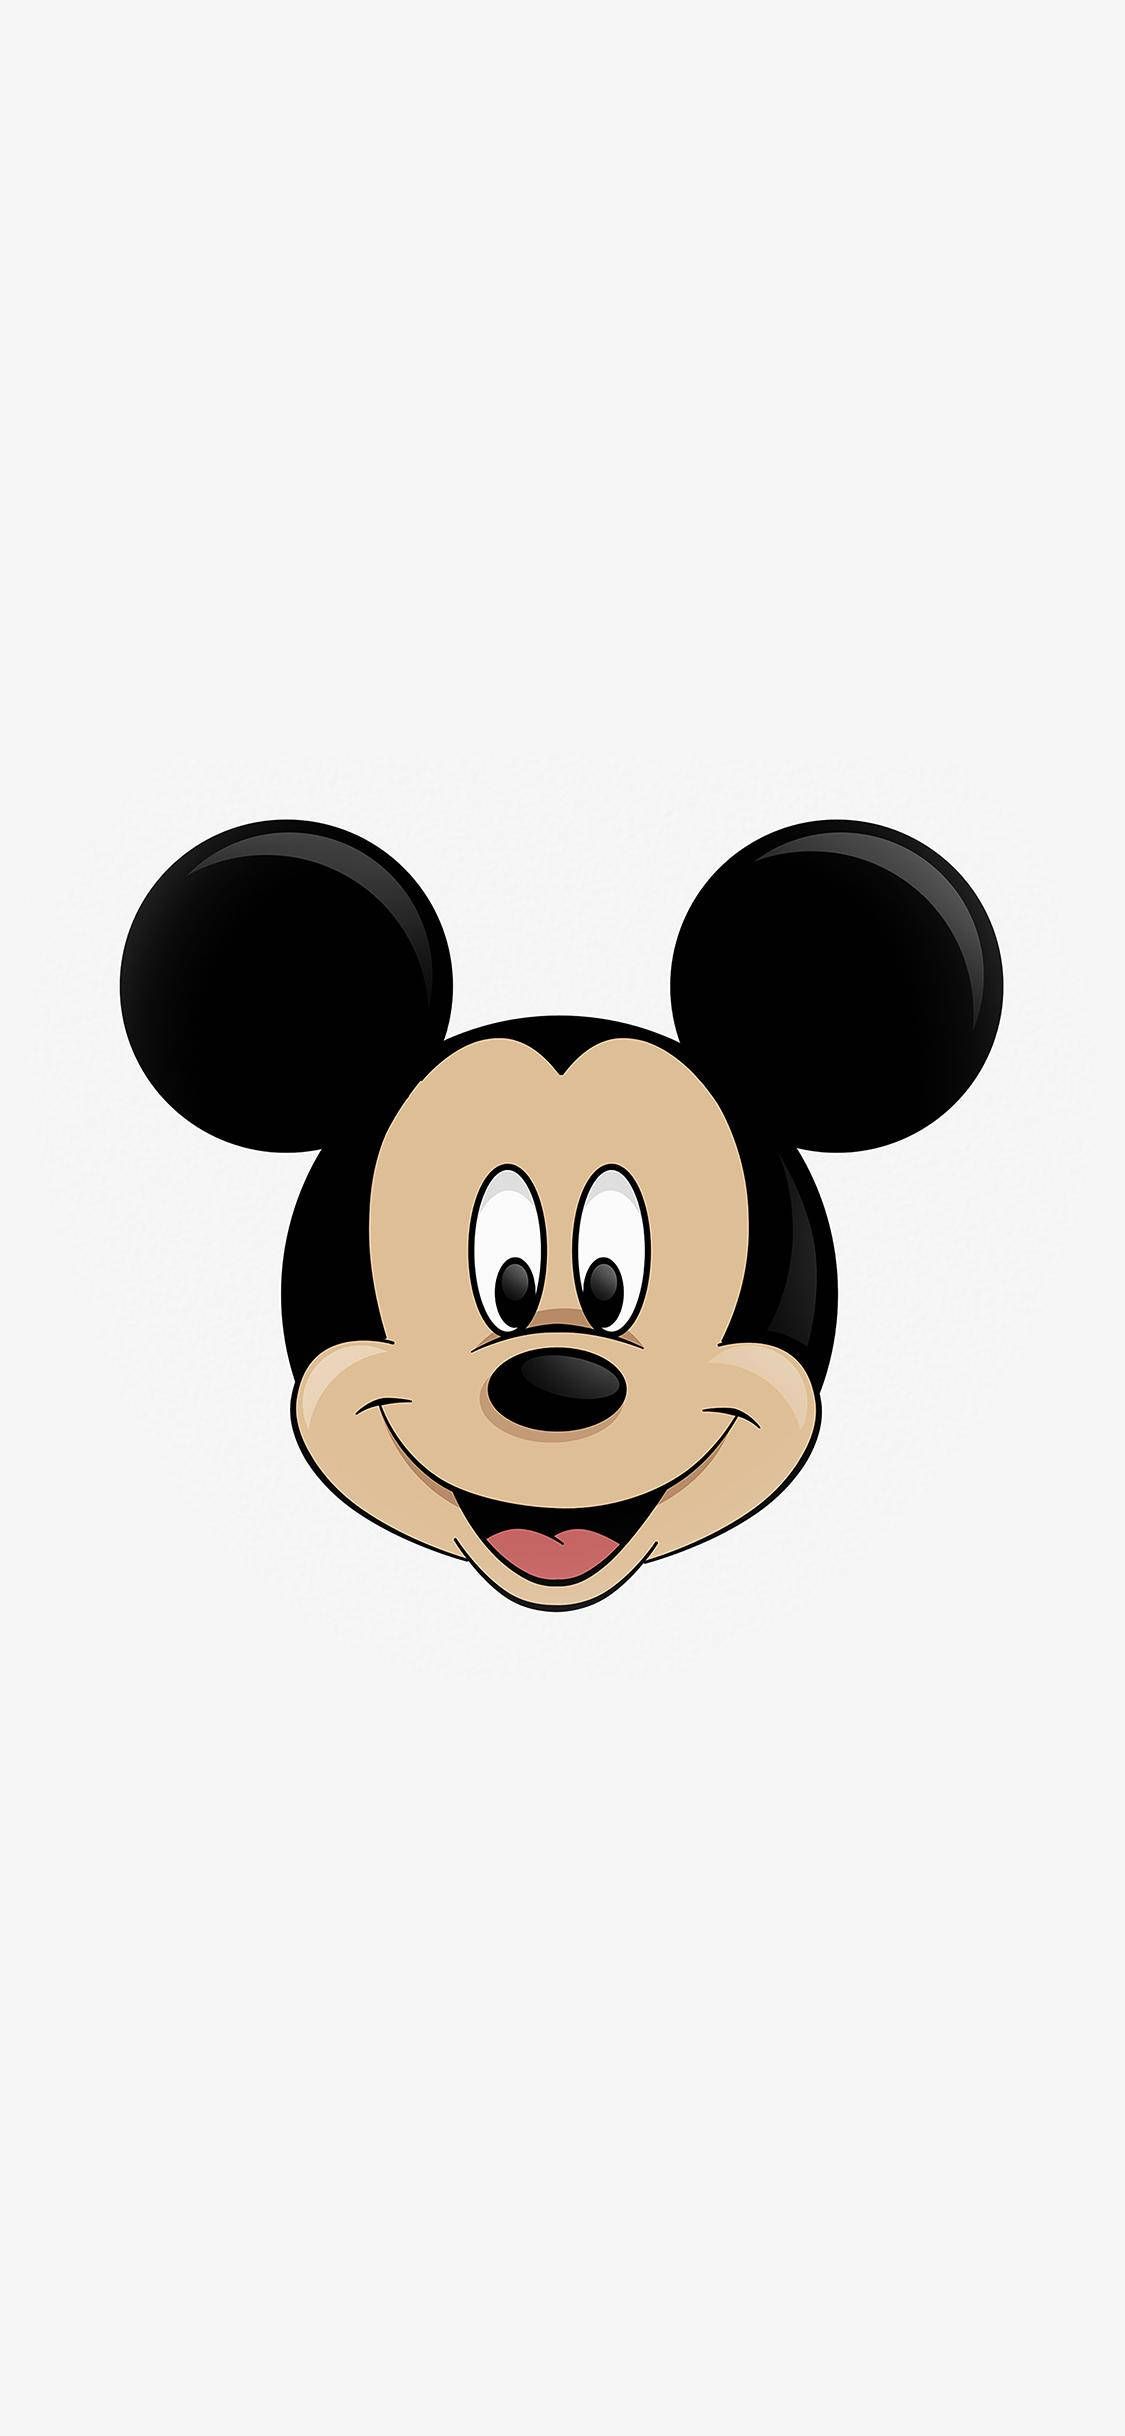 Download Minimalist Mickey Mouse iPhone Wallpaper